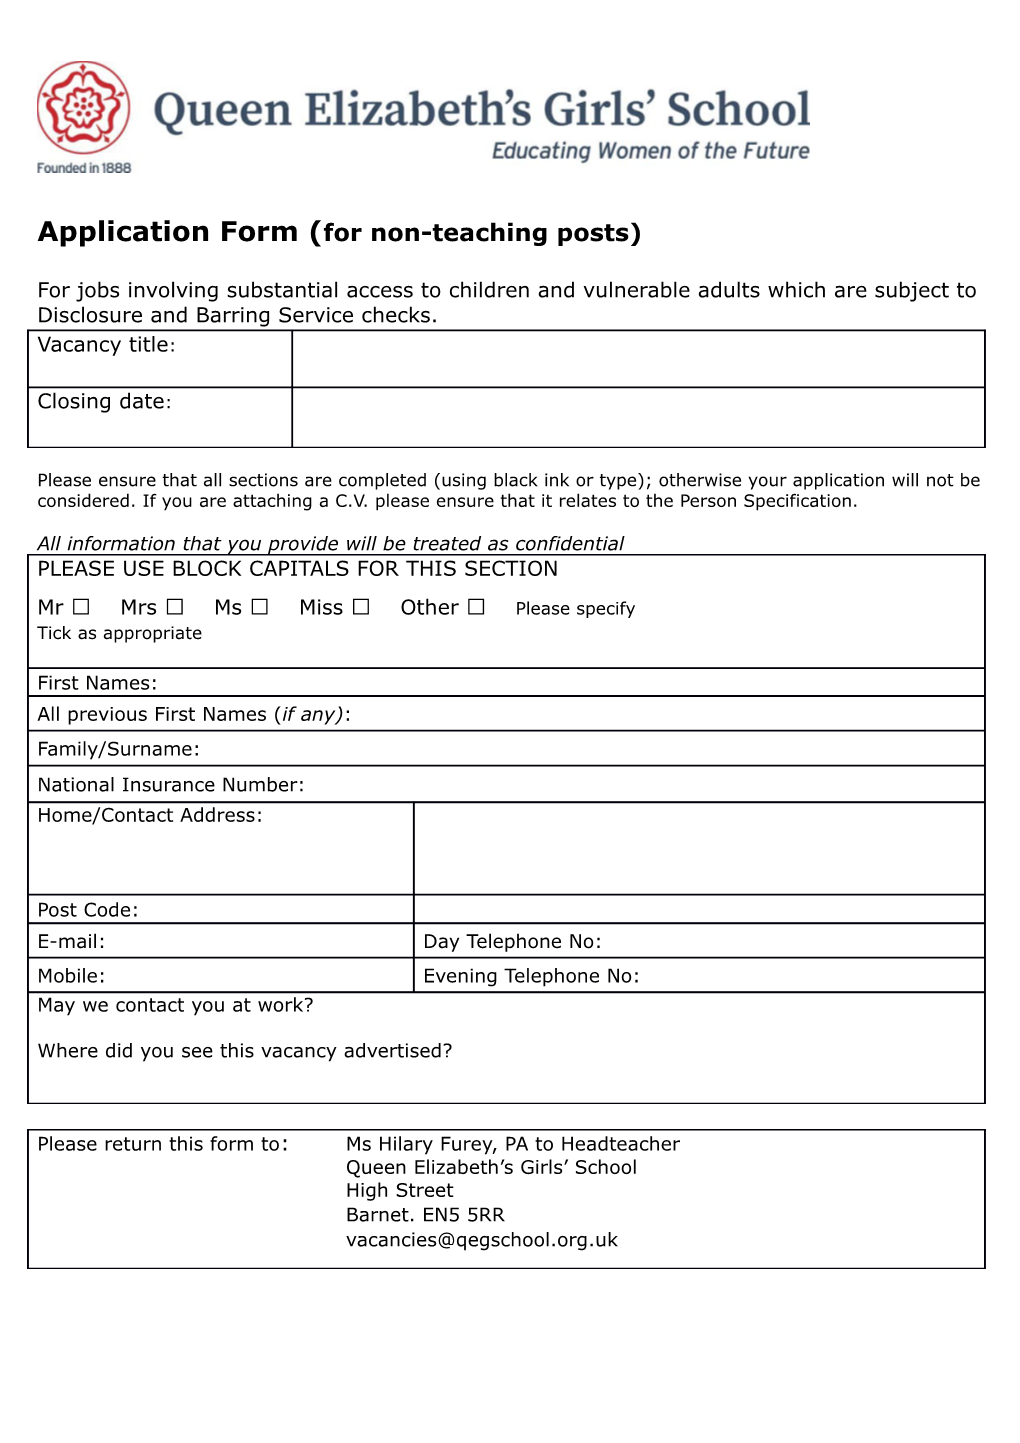 Application Form (For Non-Teaching Posts)